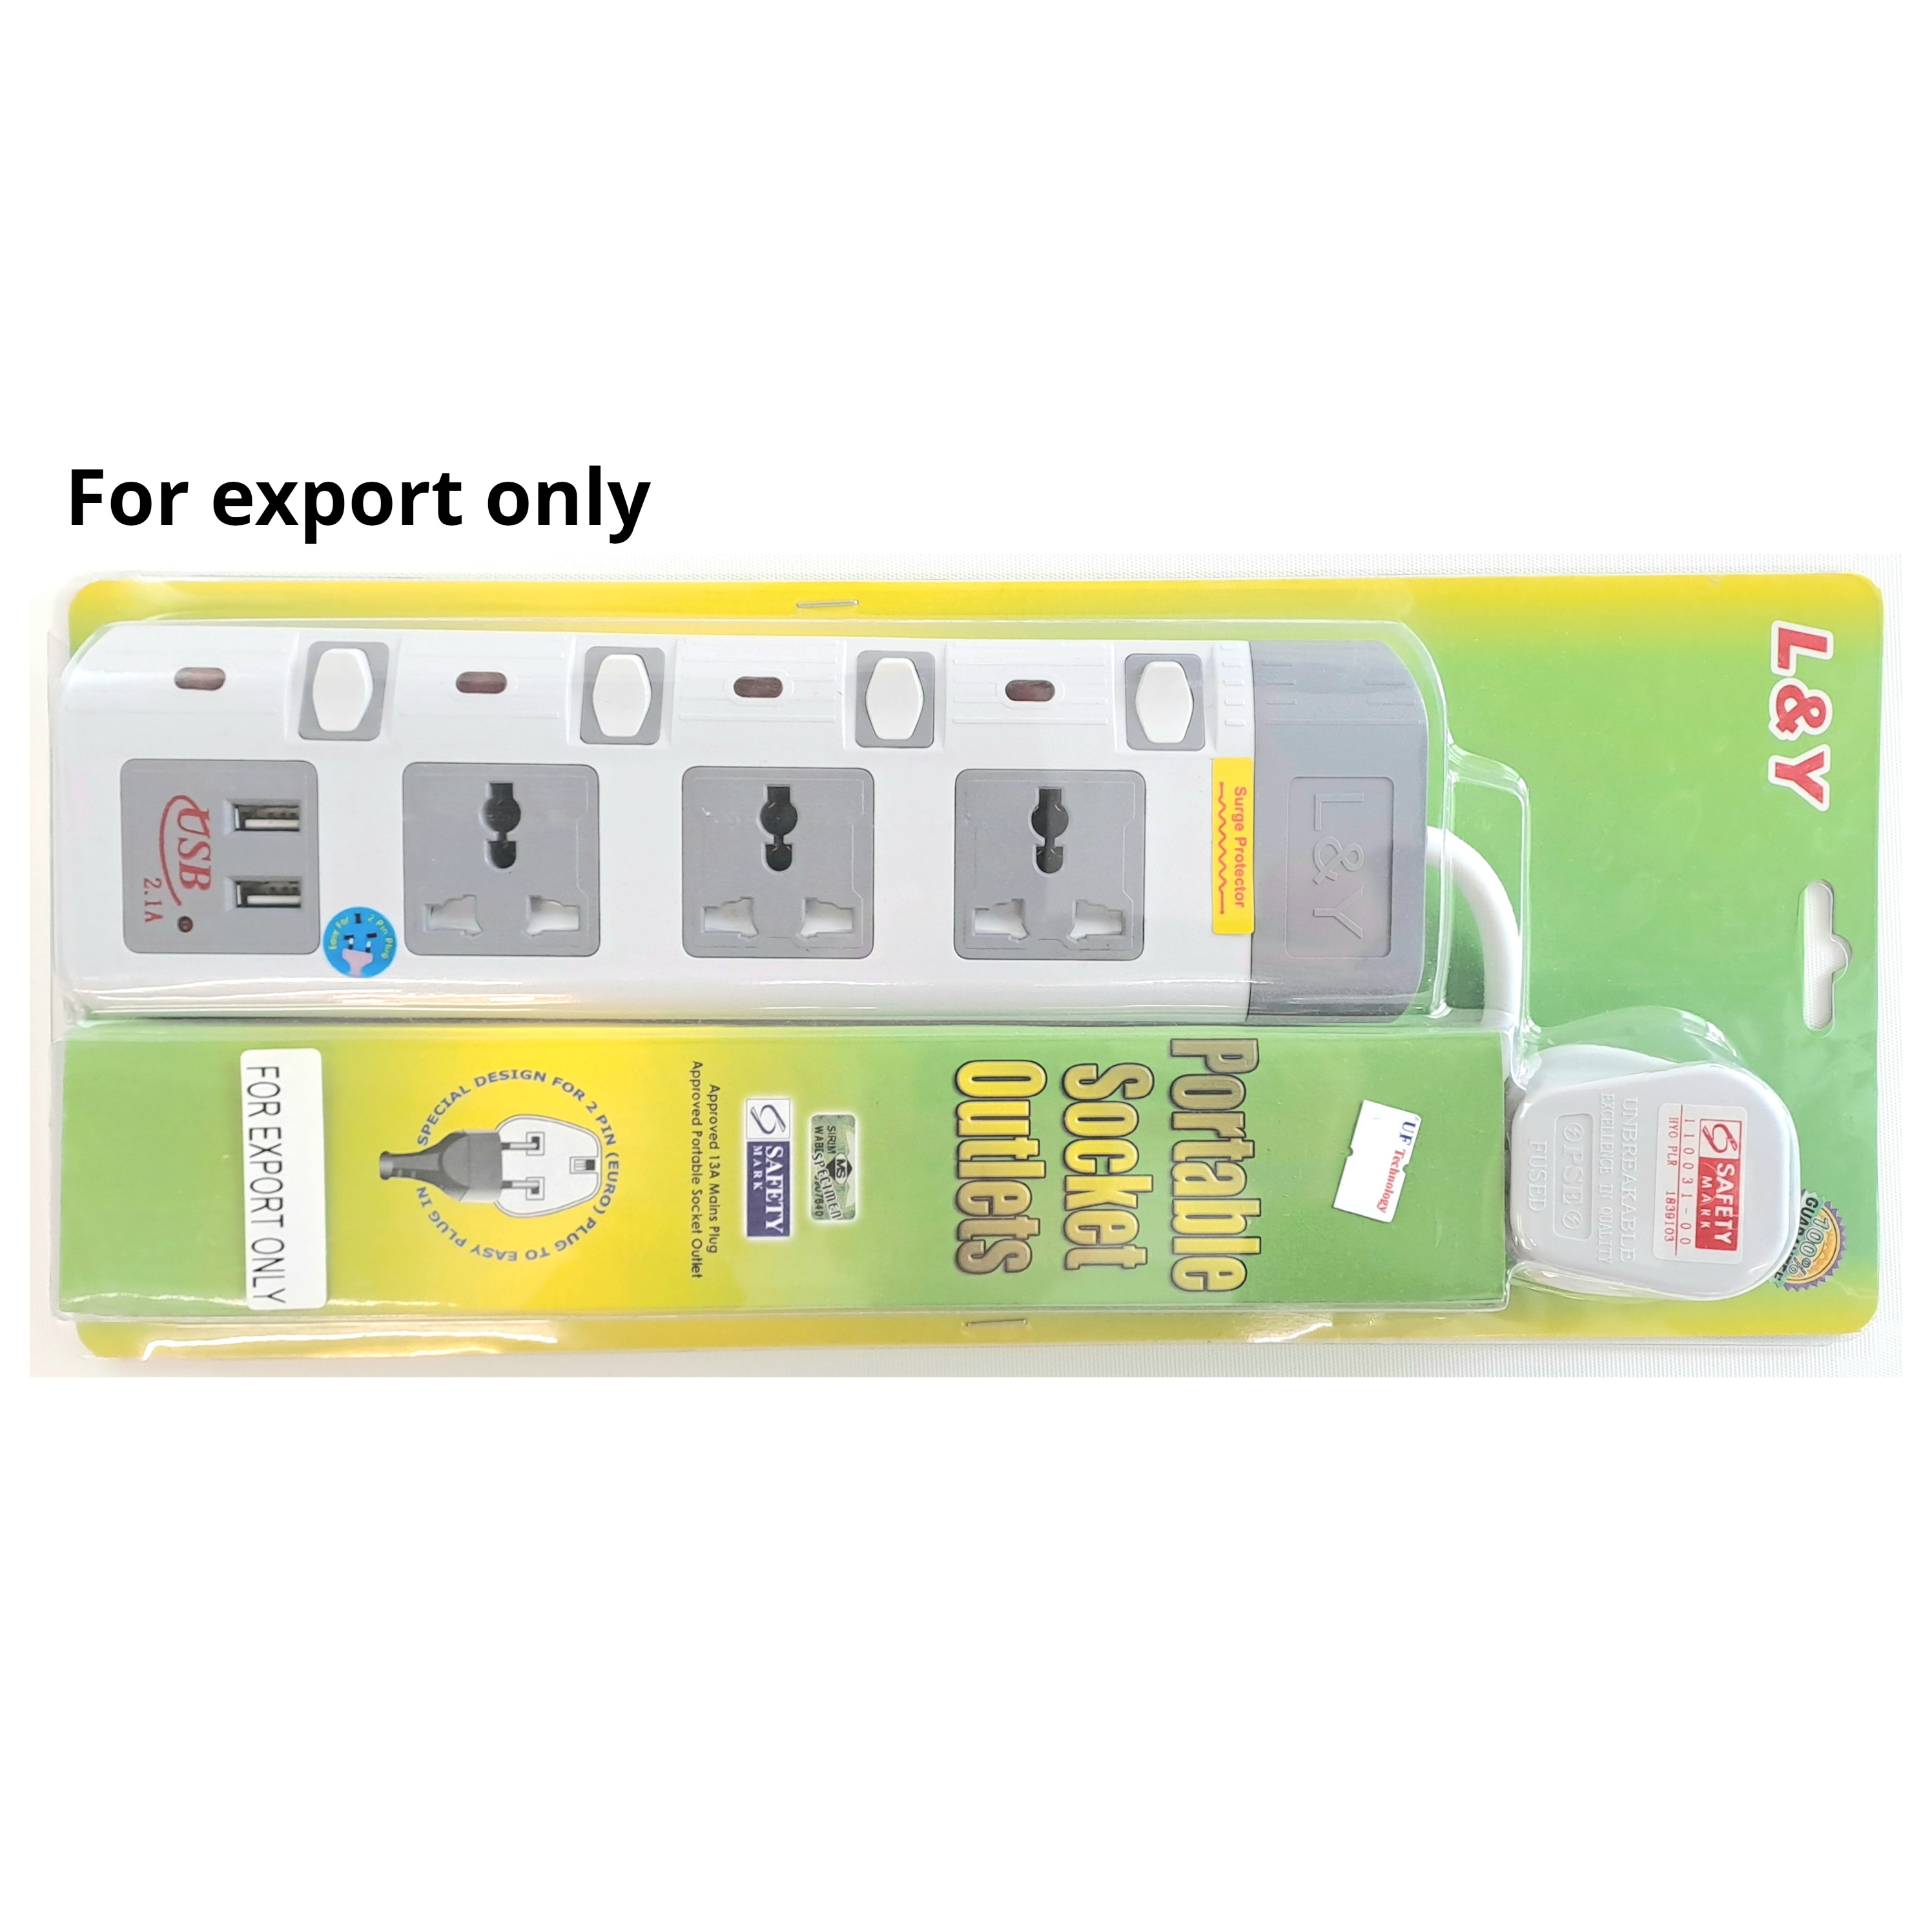 L&Y 3 Way 3pin Multi Socket Outlet with USB-3M (for export only)